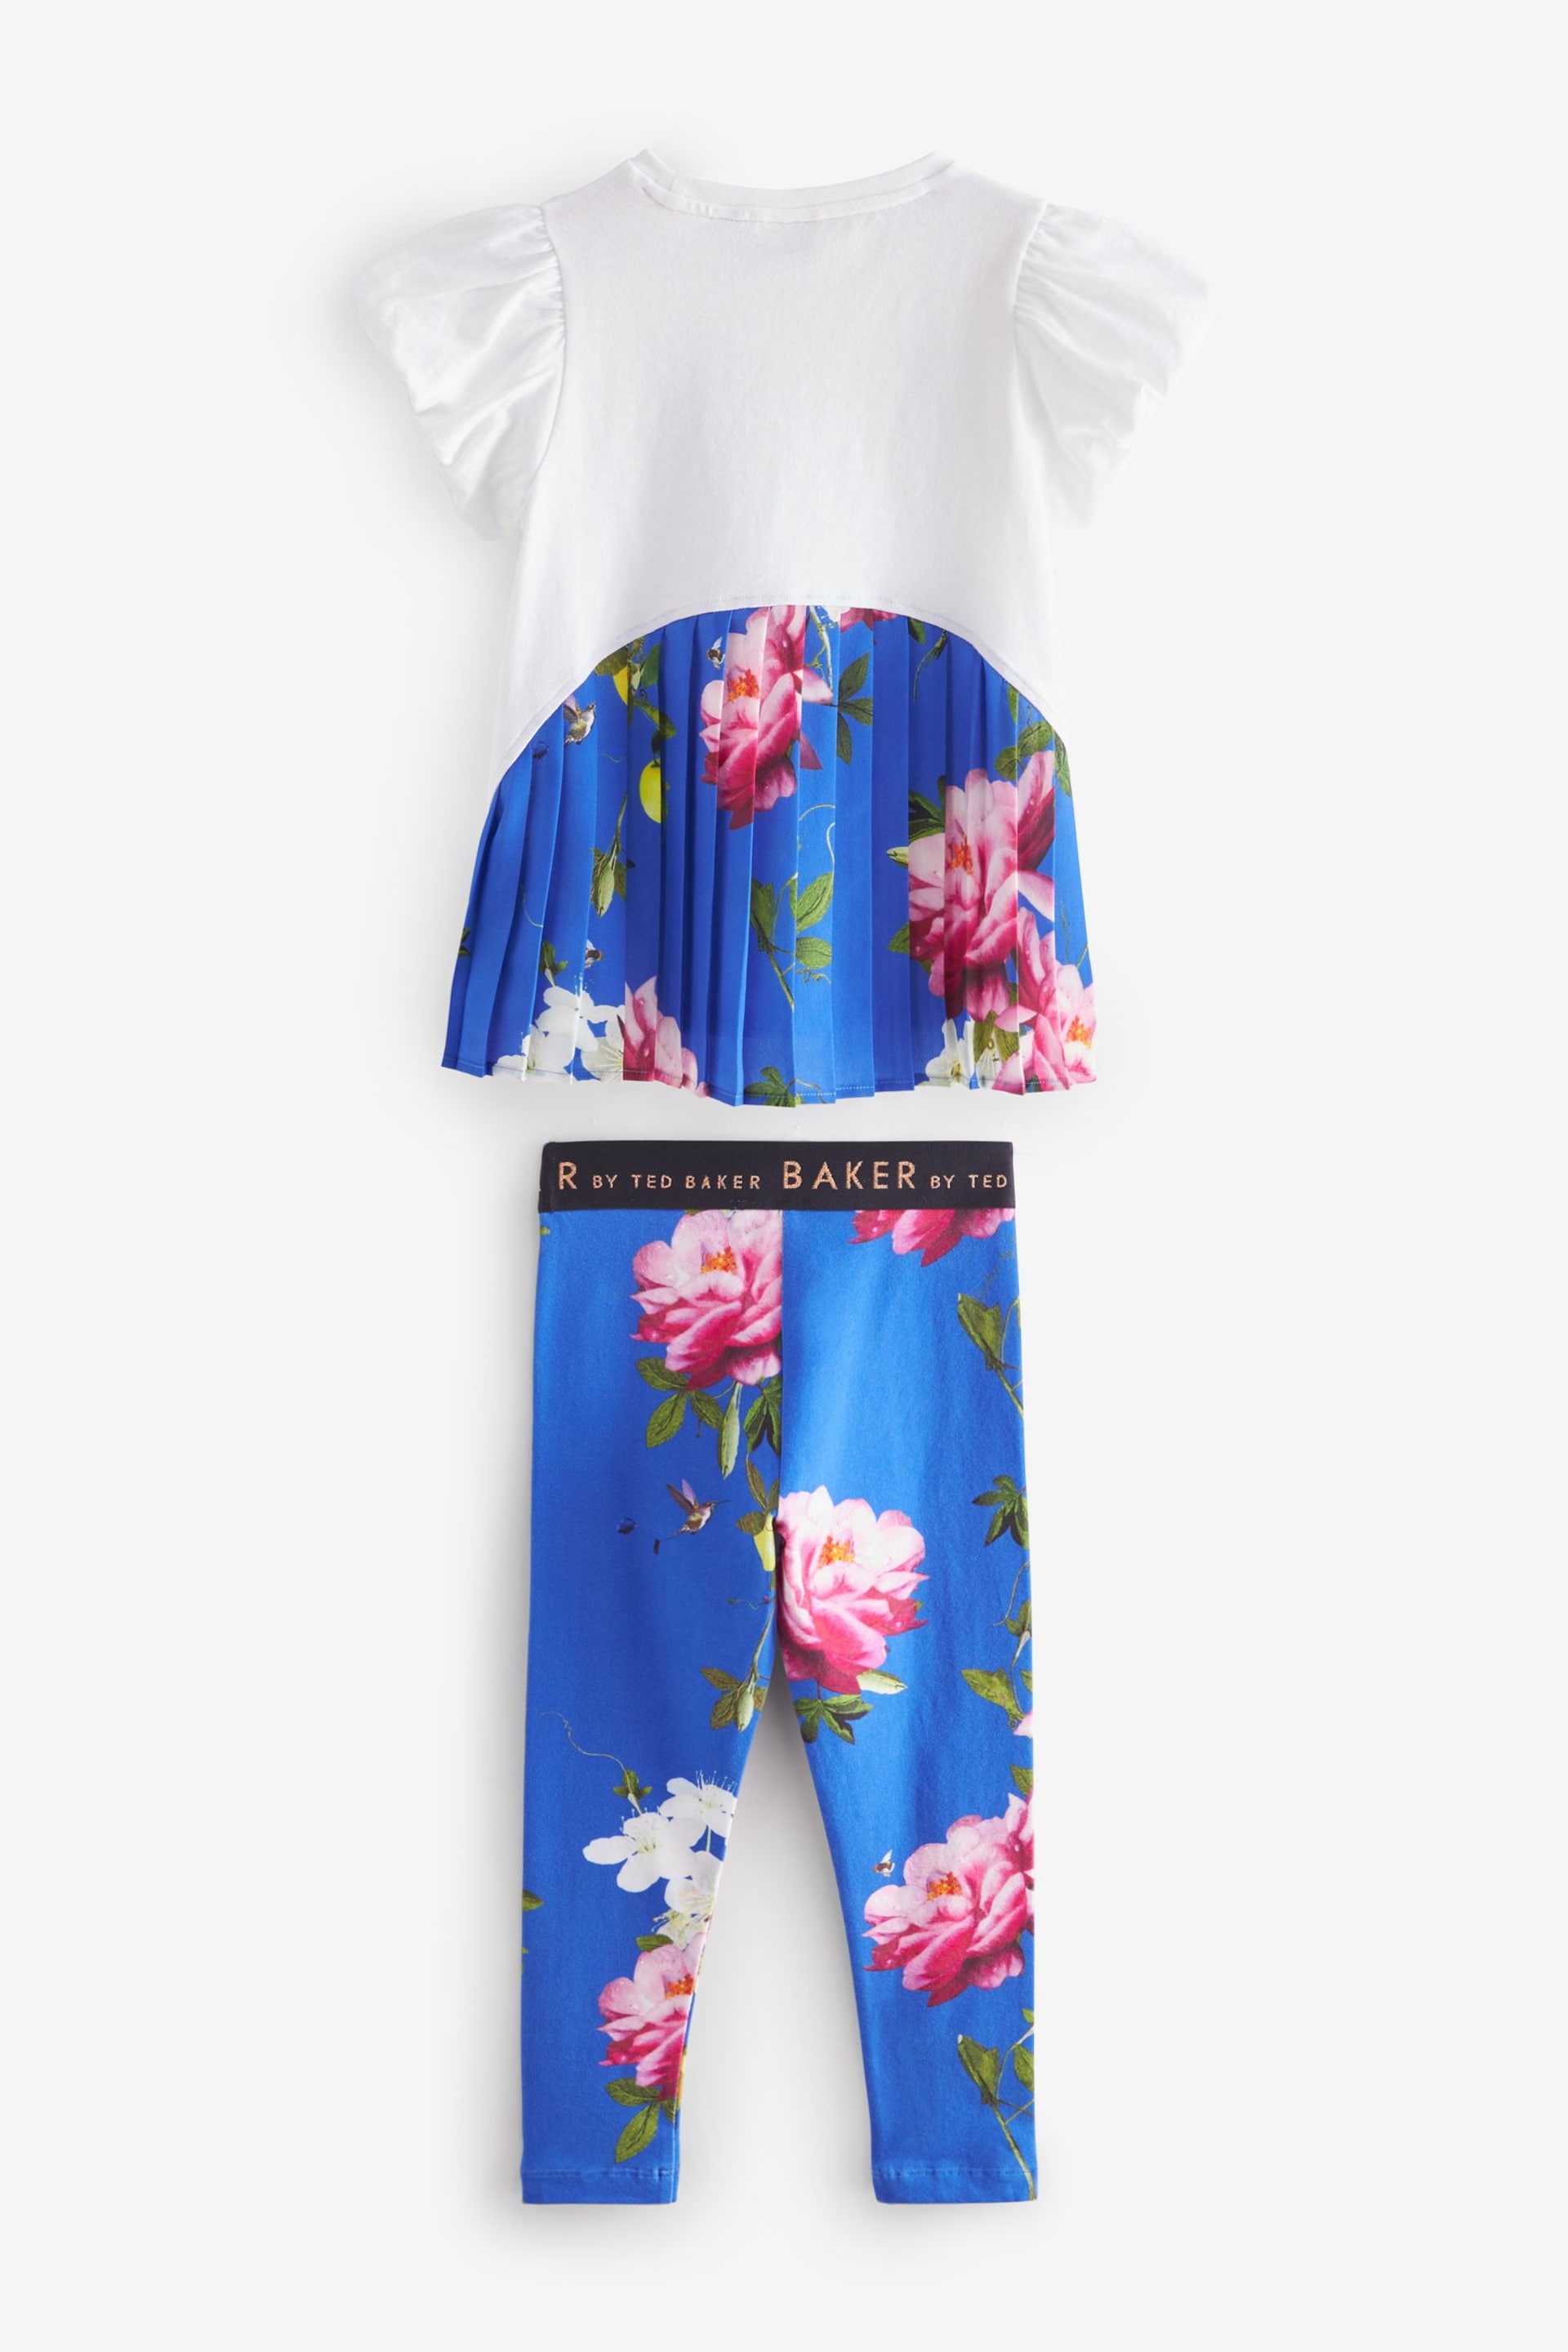 Baker by Ted Baker Pleated T-Shirt And Leggings Set - Image 10 of 13